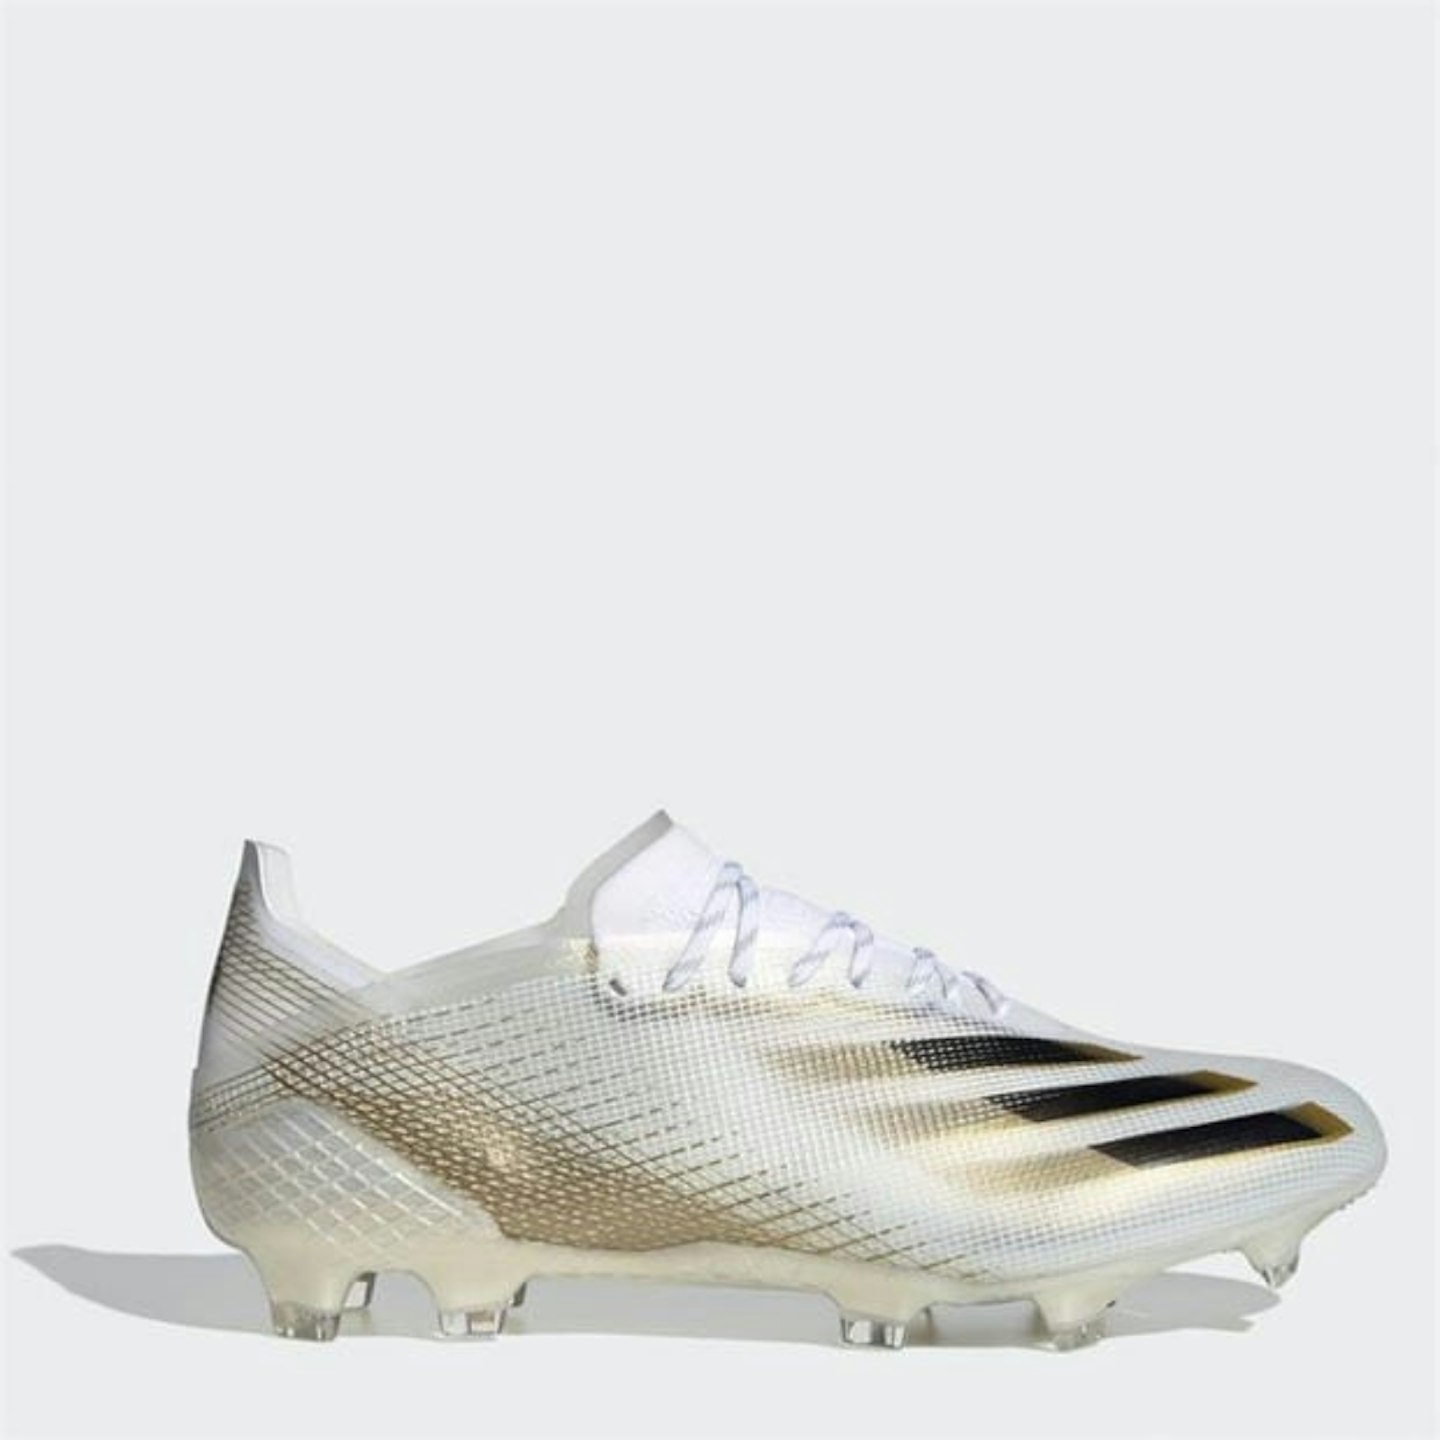 ADIDAS X. Ghosted 1 FG Football Boots